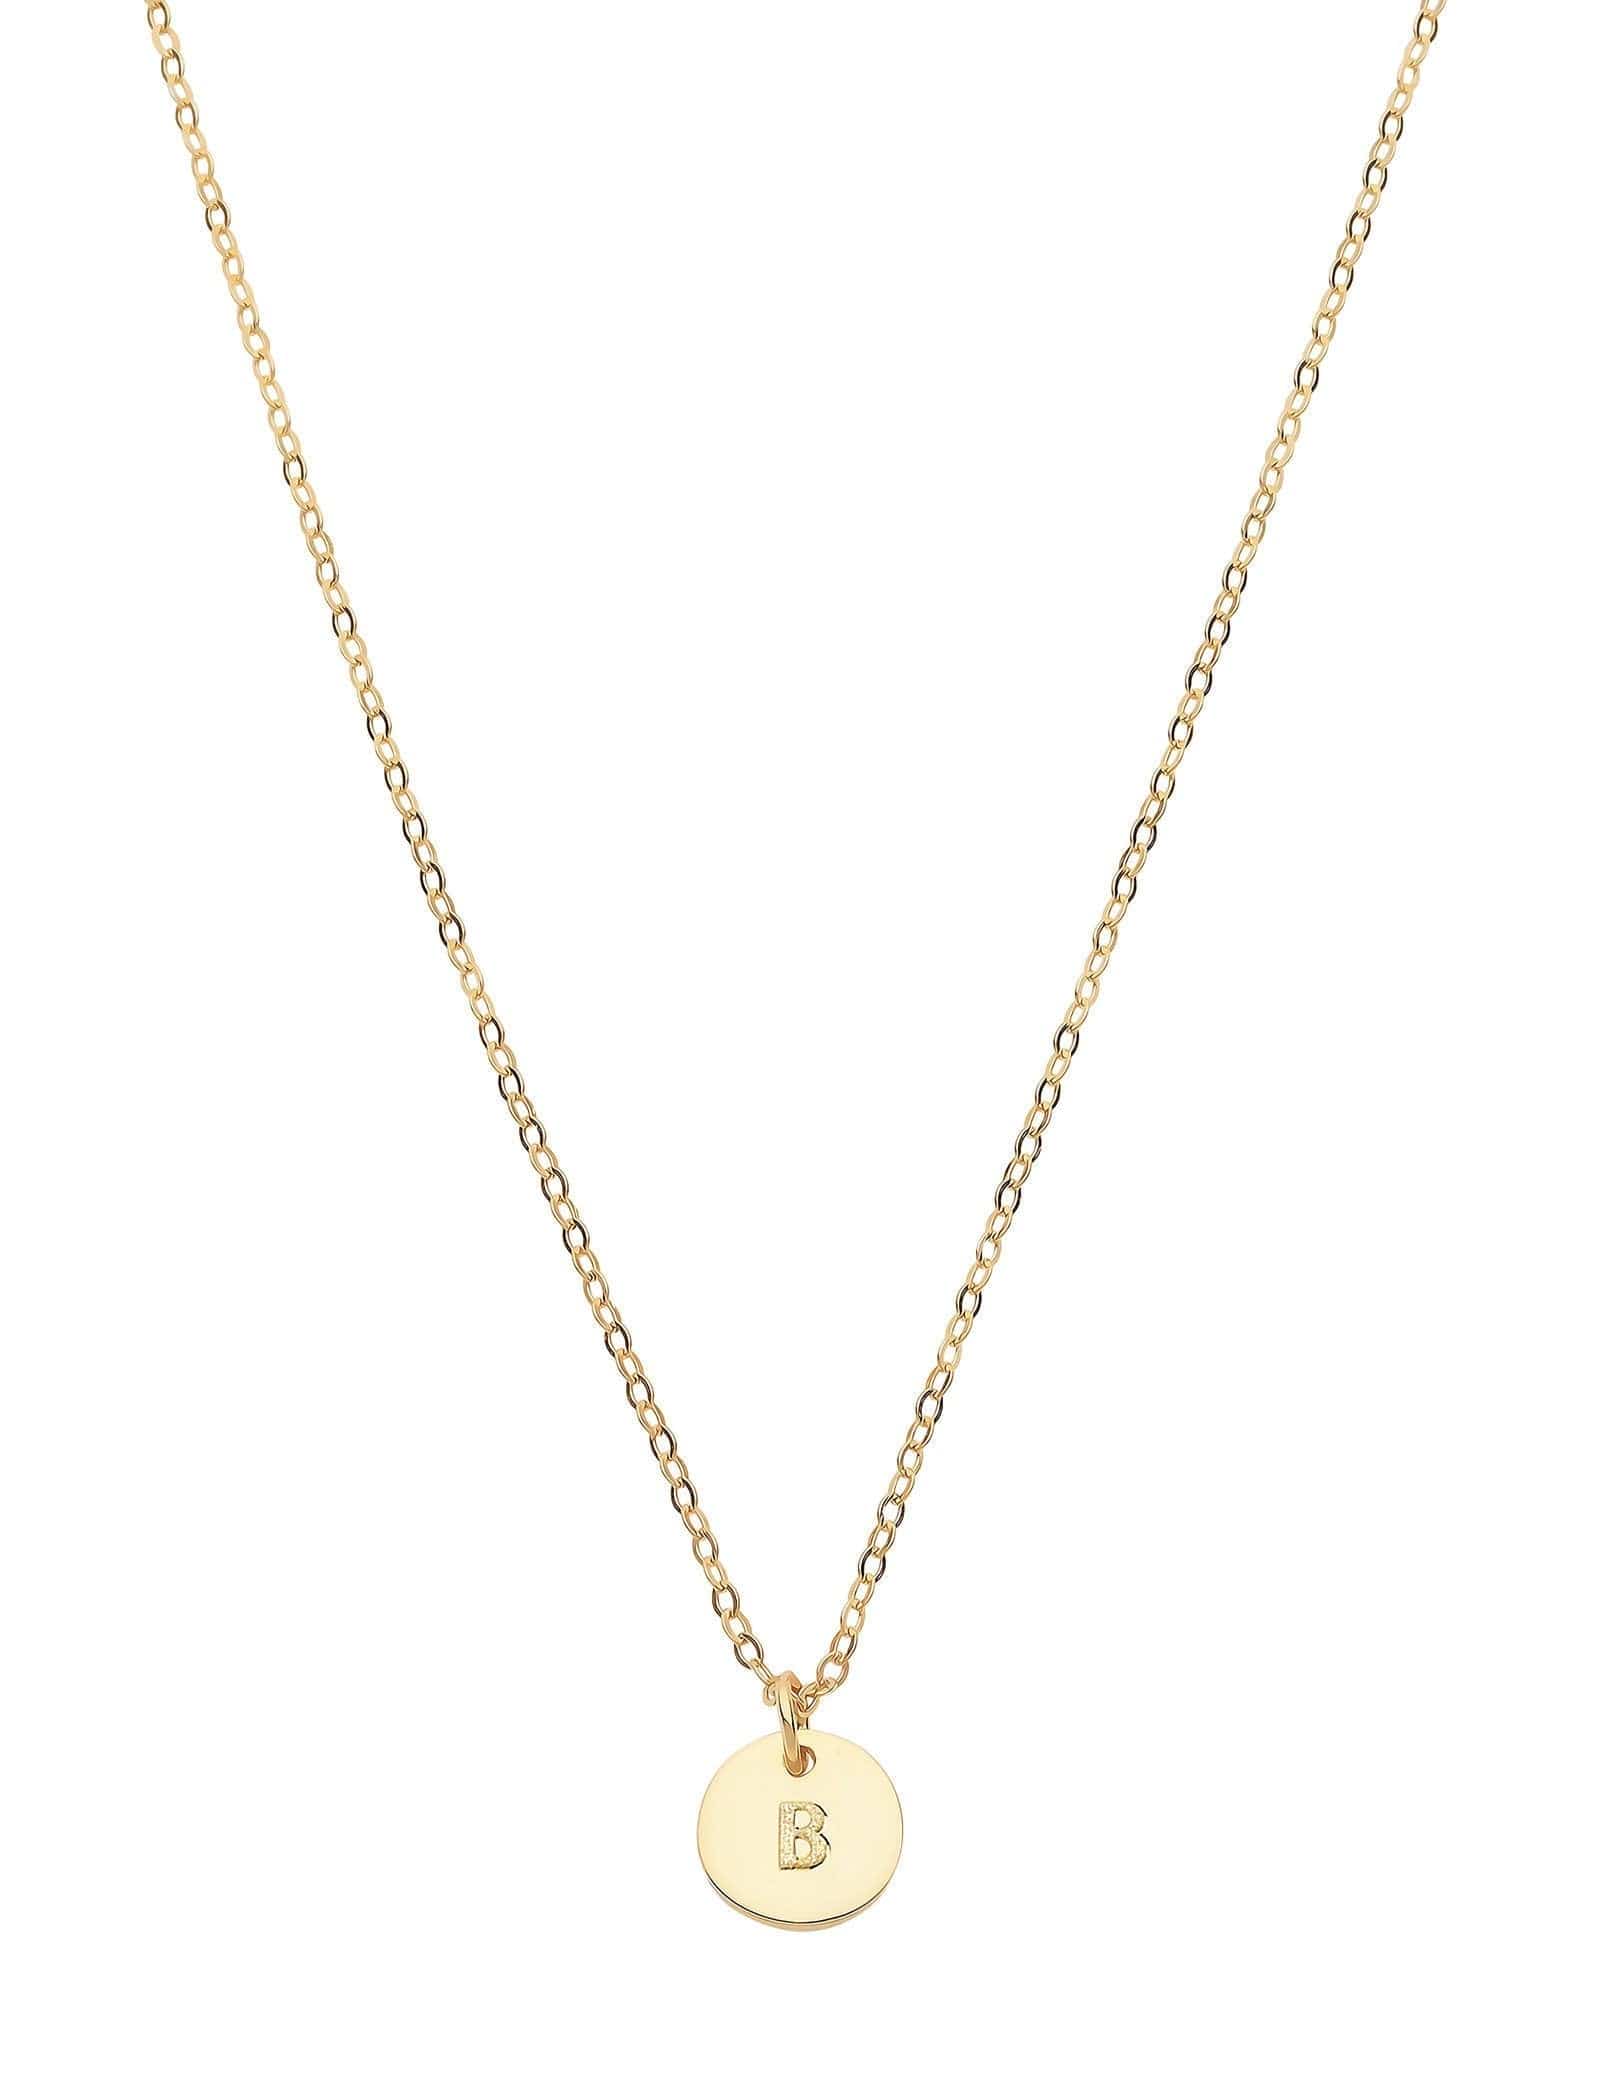 Dear Addison Yellow Gold Letter B Necklace